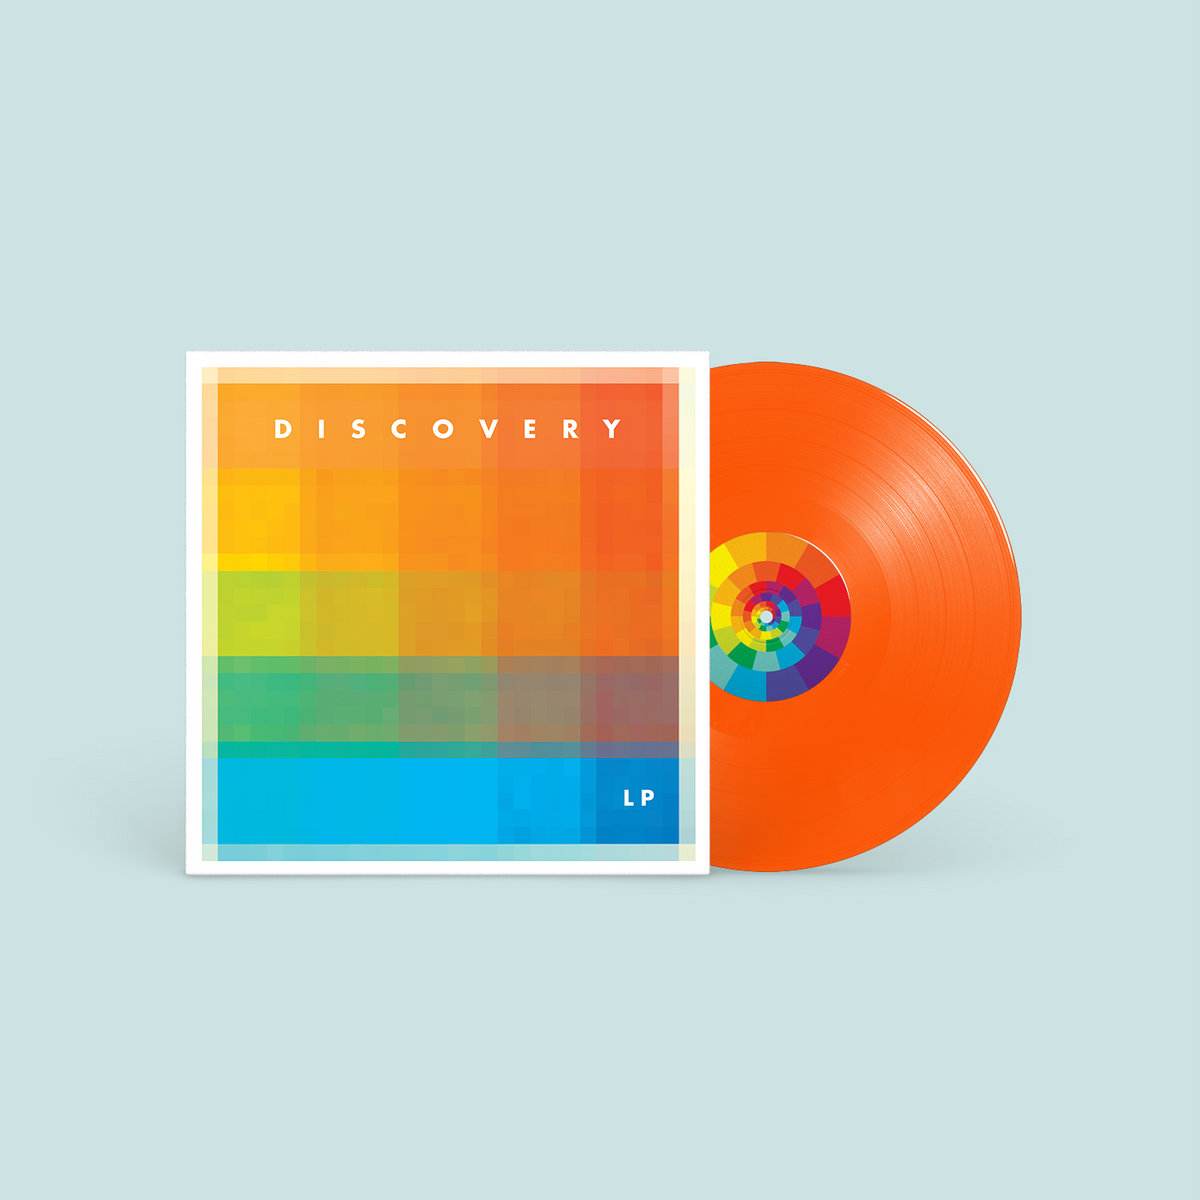 Discovery (디스커버리) - LP (Deluxe Edition) [오렌지 컬러 LP]